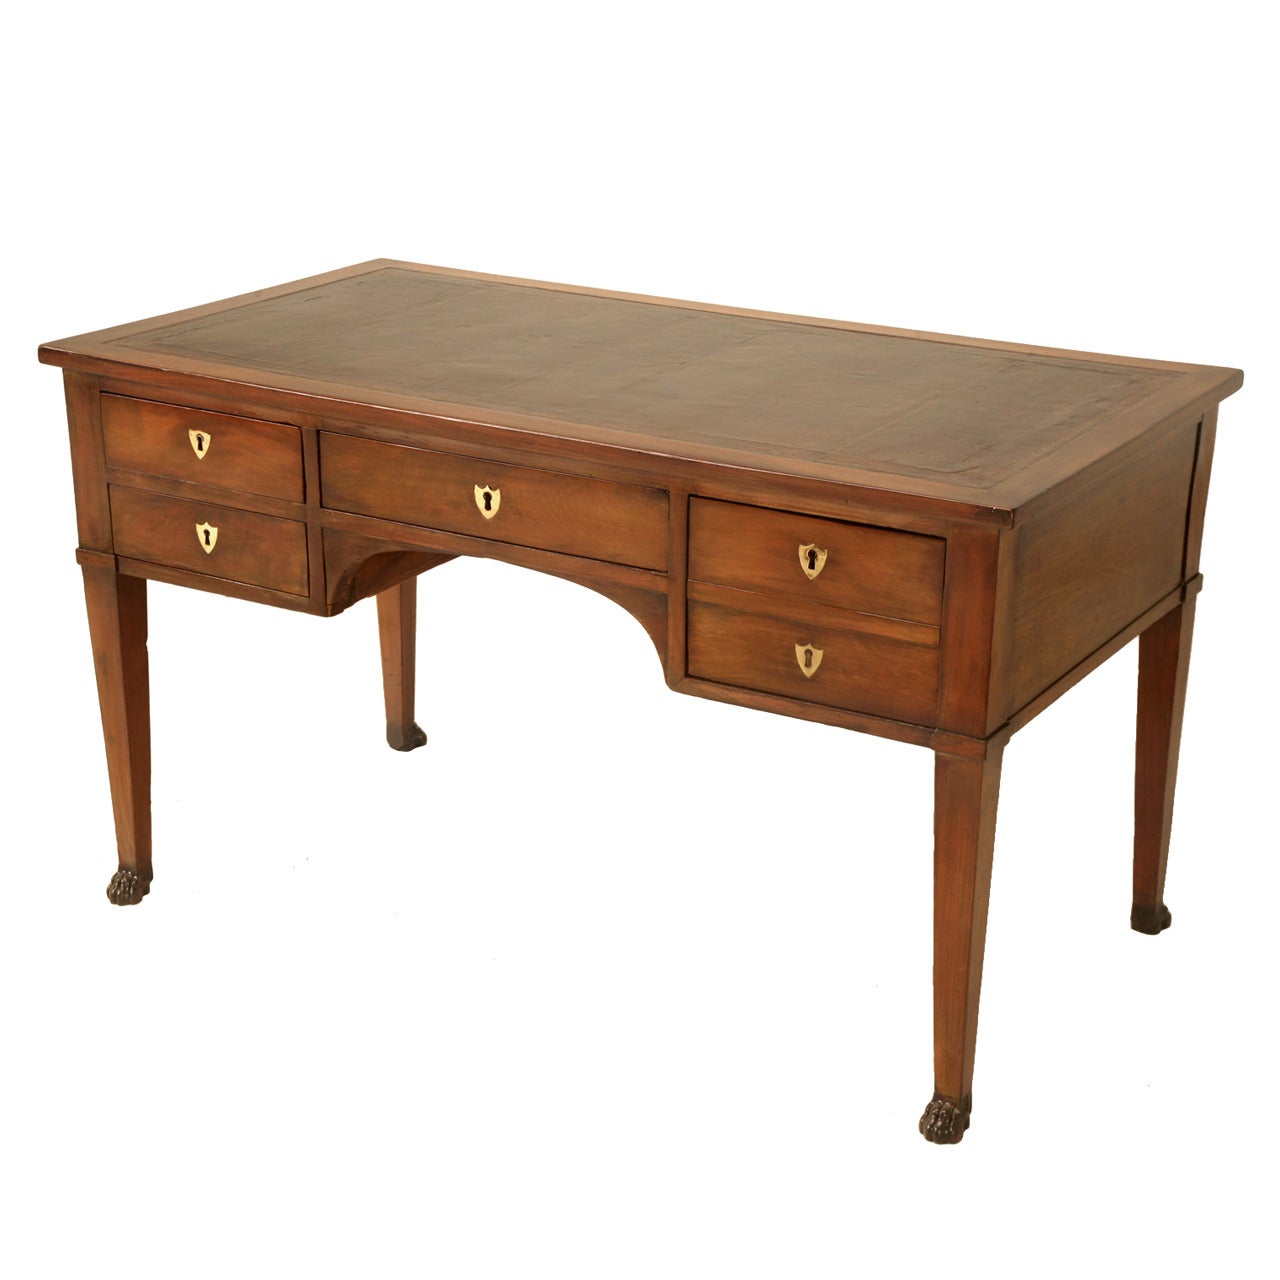 French Mahogany Desk with Great Paw Feet, circa 1880